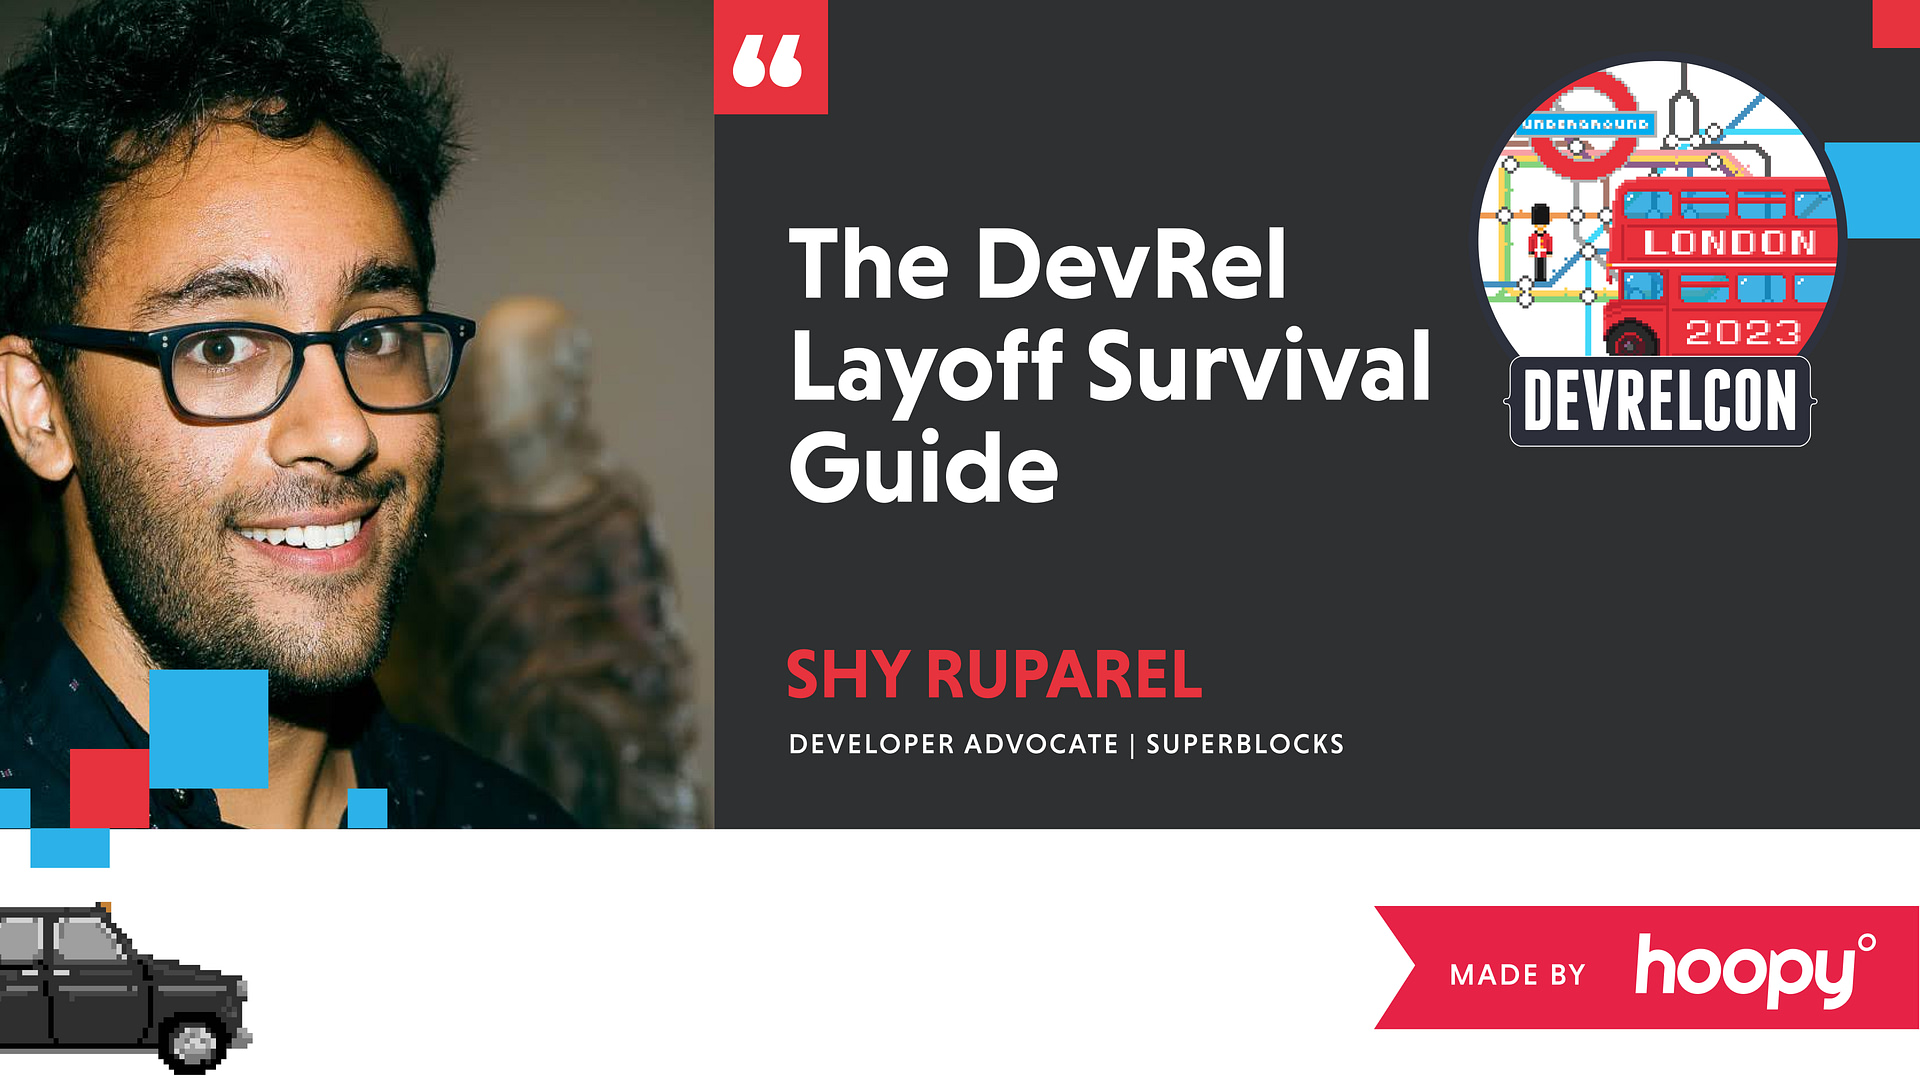 Promotional banner for a presentation titled 'The DevRel Layoff Survival Guide' by Shy Ruparel, Developer Advocate at Superblocks, at DevRelCon London 2023. The left side features a smiling individual with glasses. The right side has a graphic design with iconic London imagery such as the London Underground sign, a red double-decker bus, and the event name 'DEVRELCON'. The bottom right corner has the text 'MADE BY hoopy'.